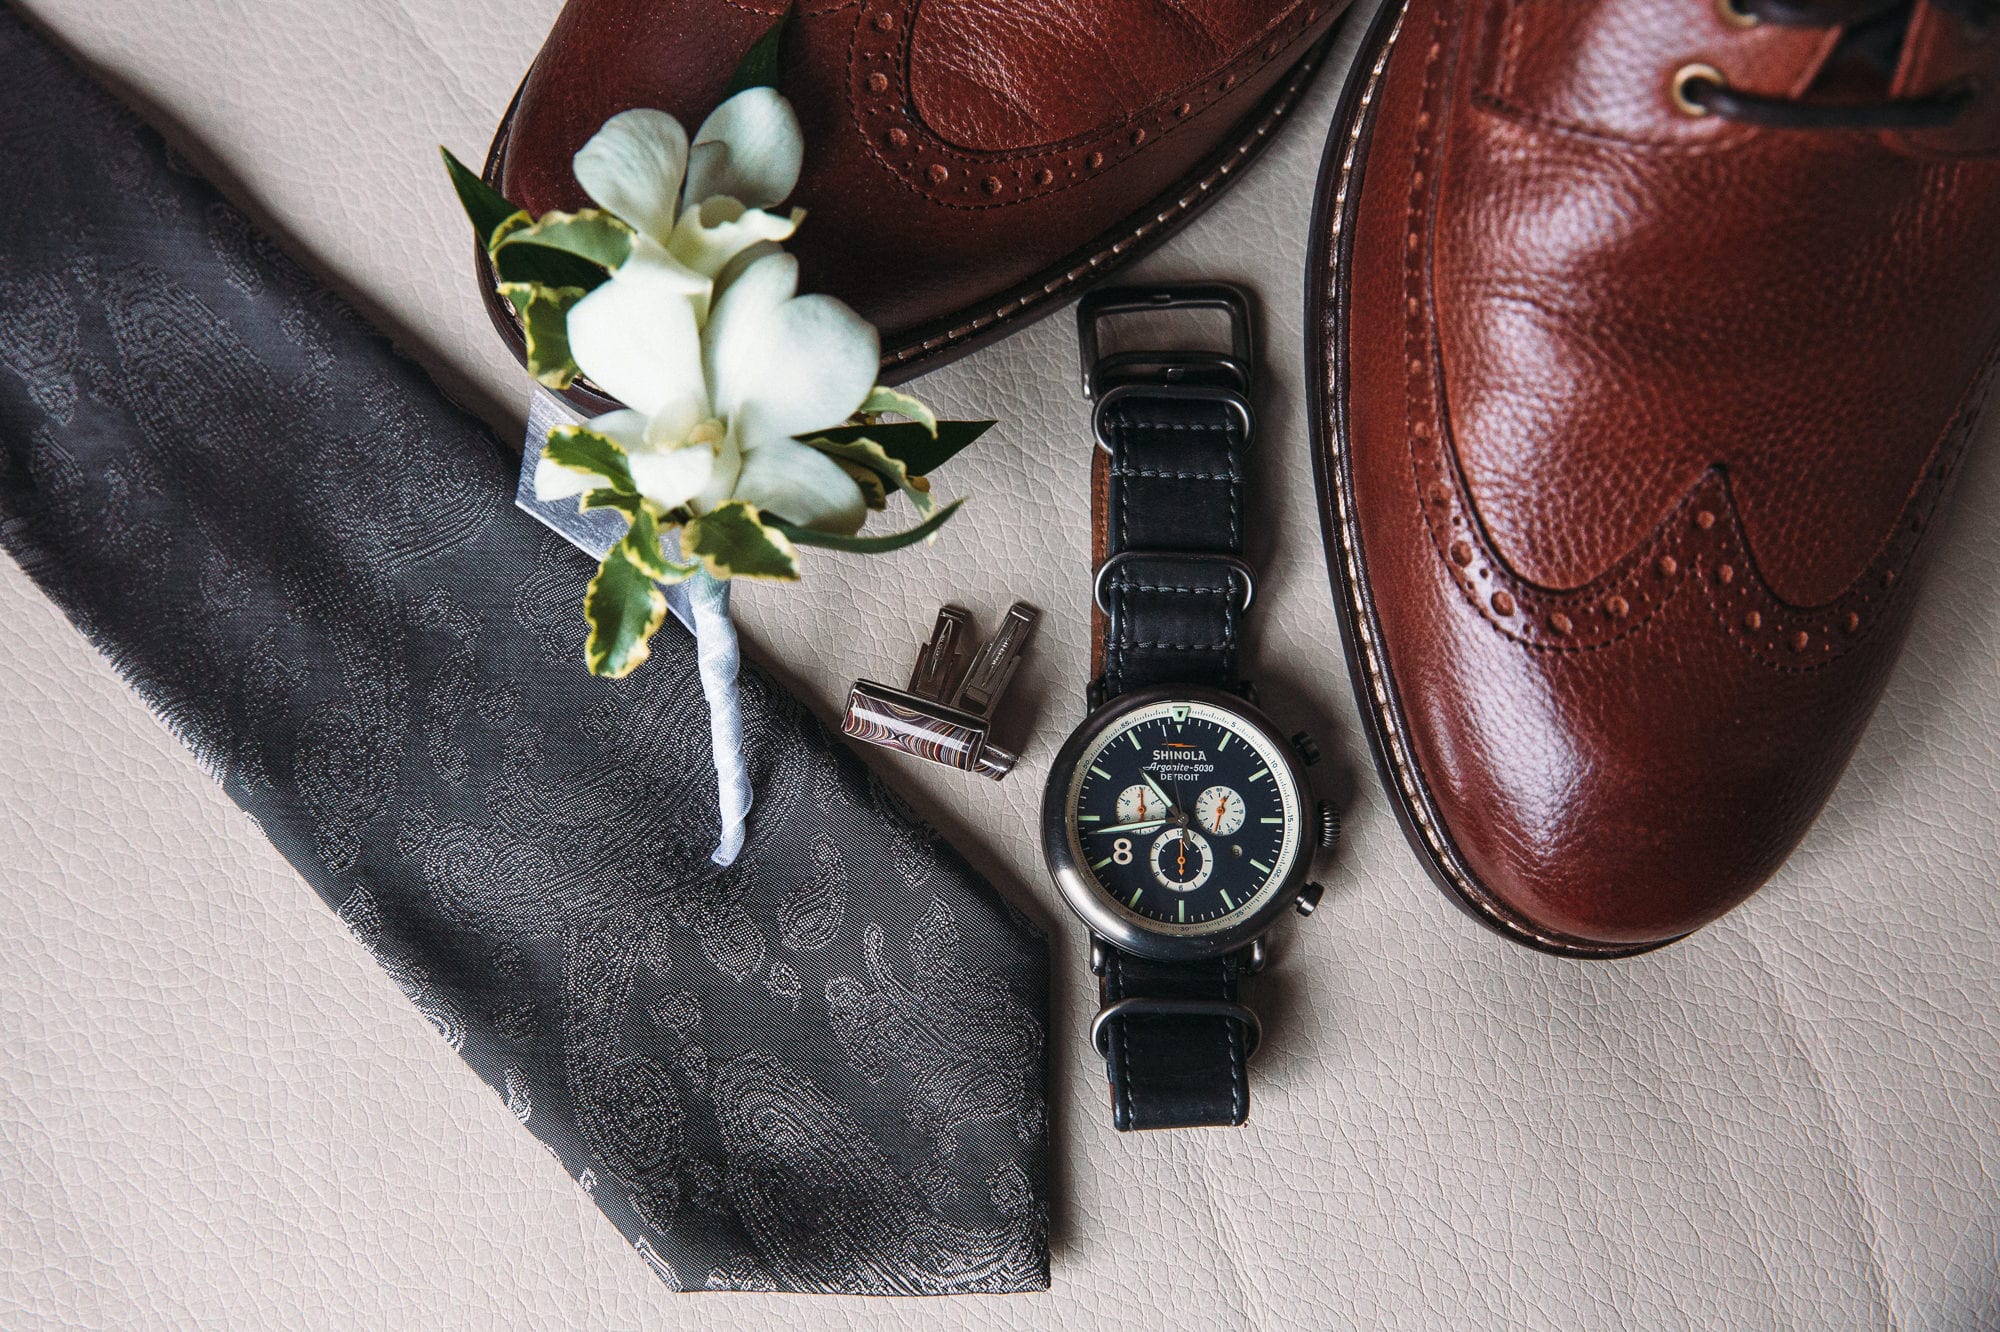 grooms shoes, tie, and Shinola watch displayed on sofa